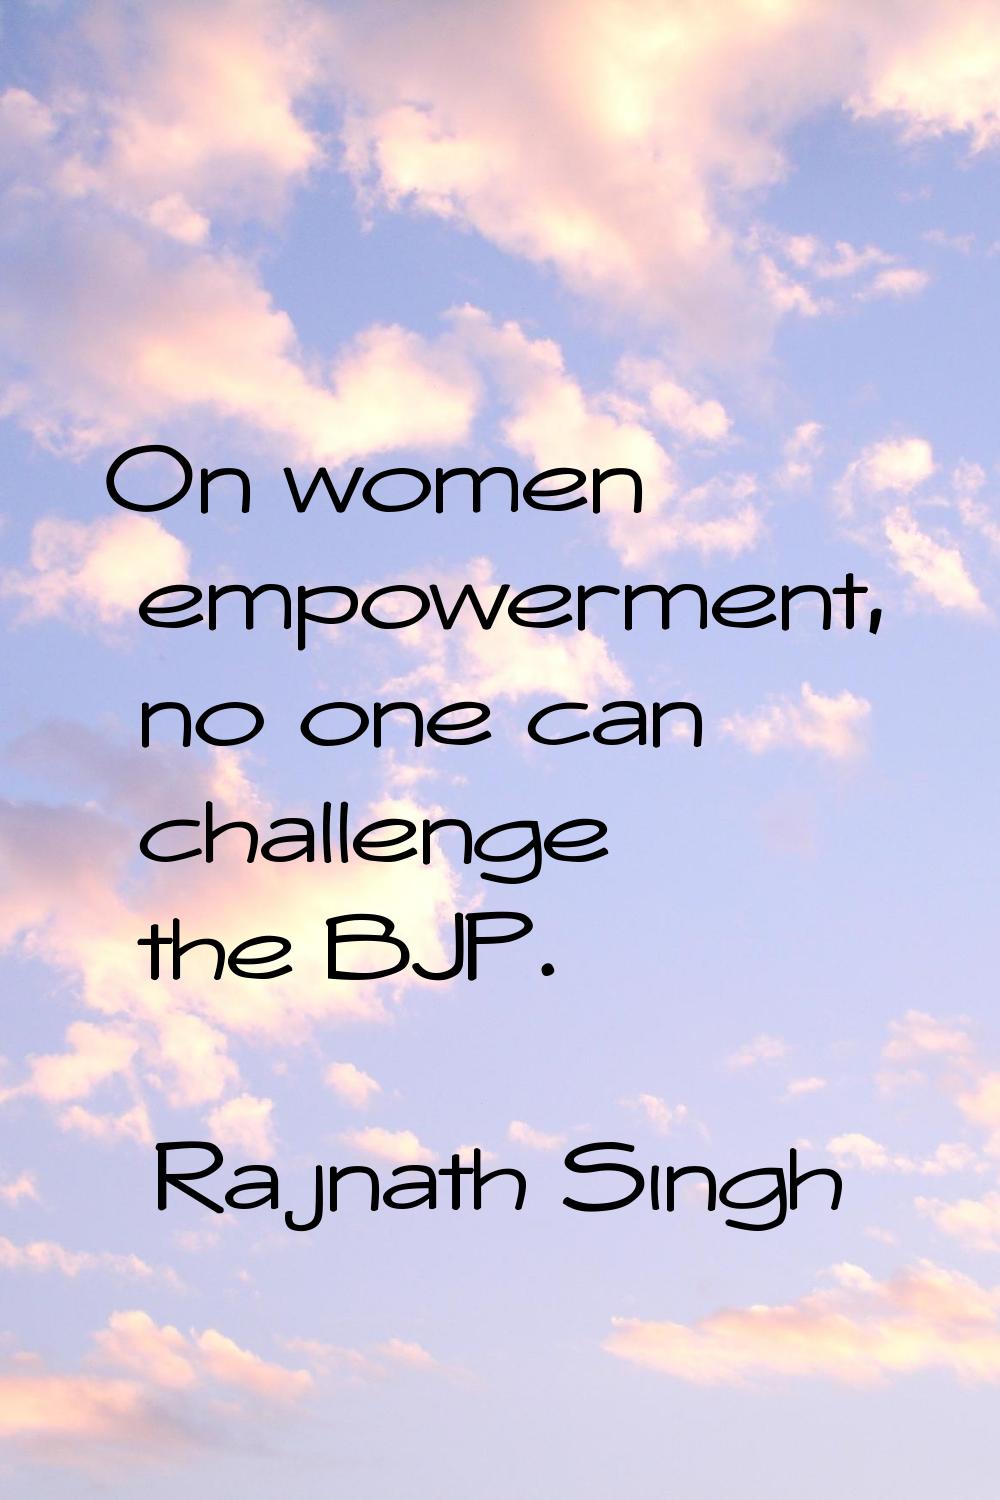 On women empowerment, no one can challenge the BJP.